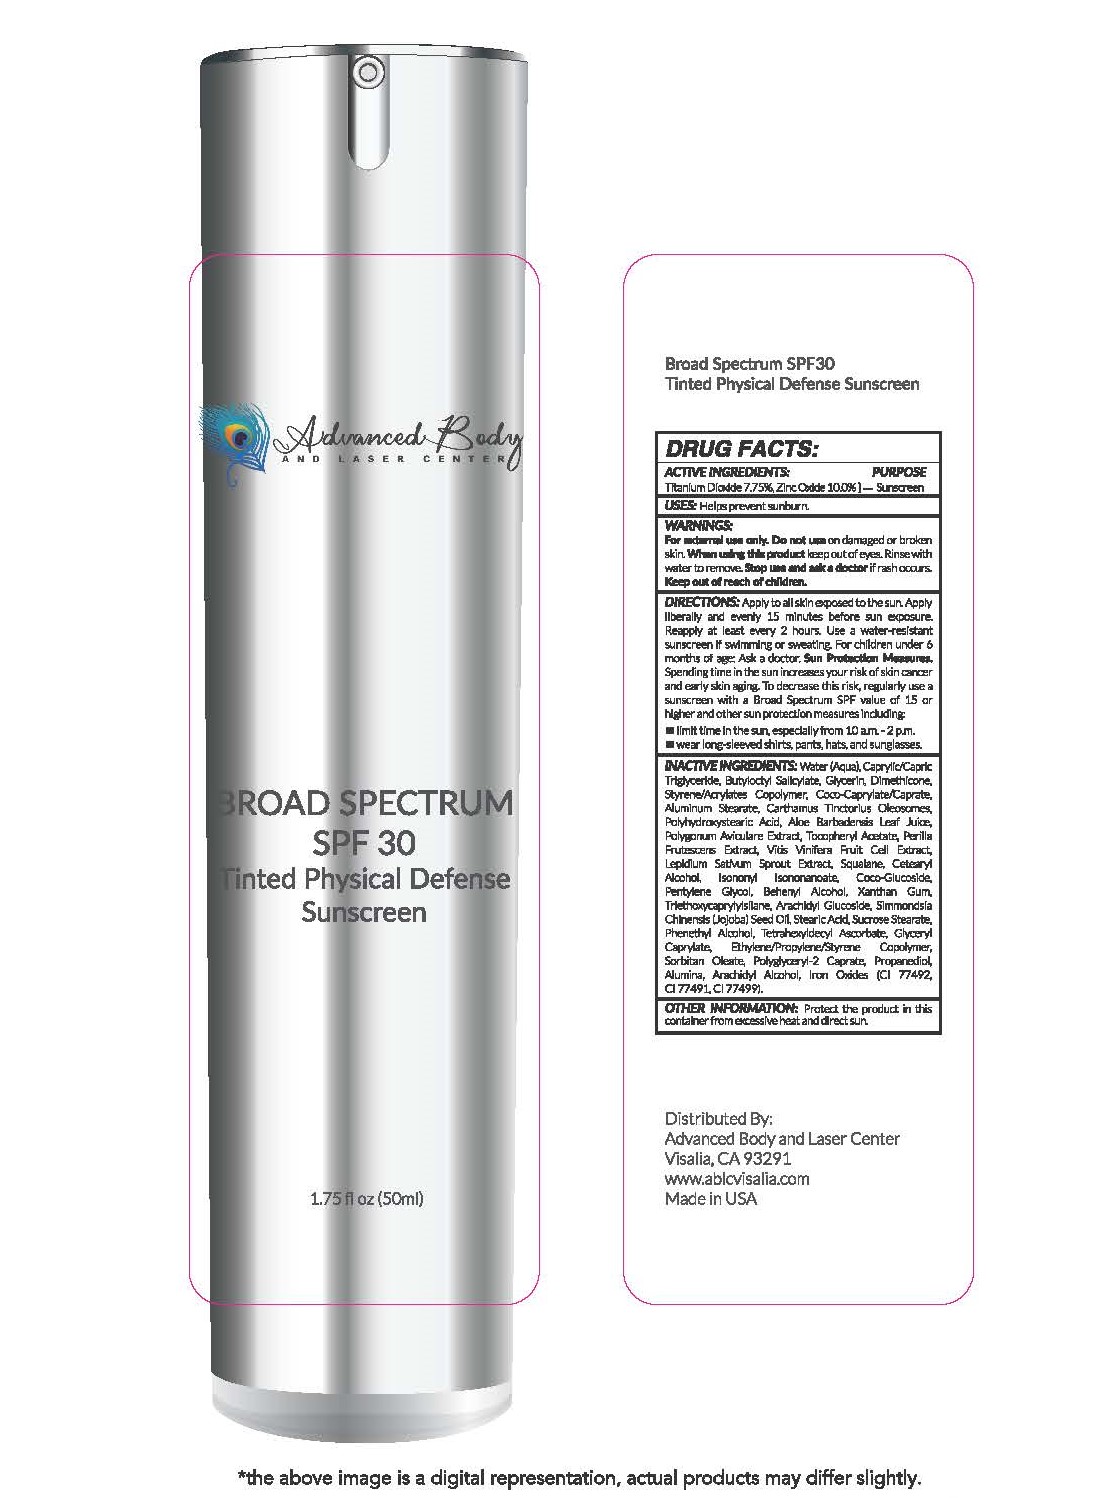 Advanced Body and Laser Center Broad Spectrum SPF 30 Tinted Mineral Defense Sunscreen 1.75 fl oz (50ml)